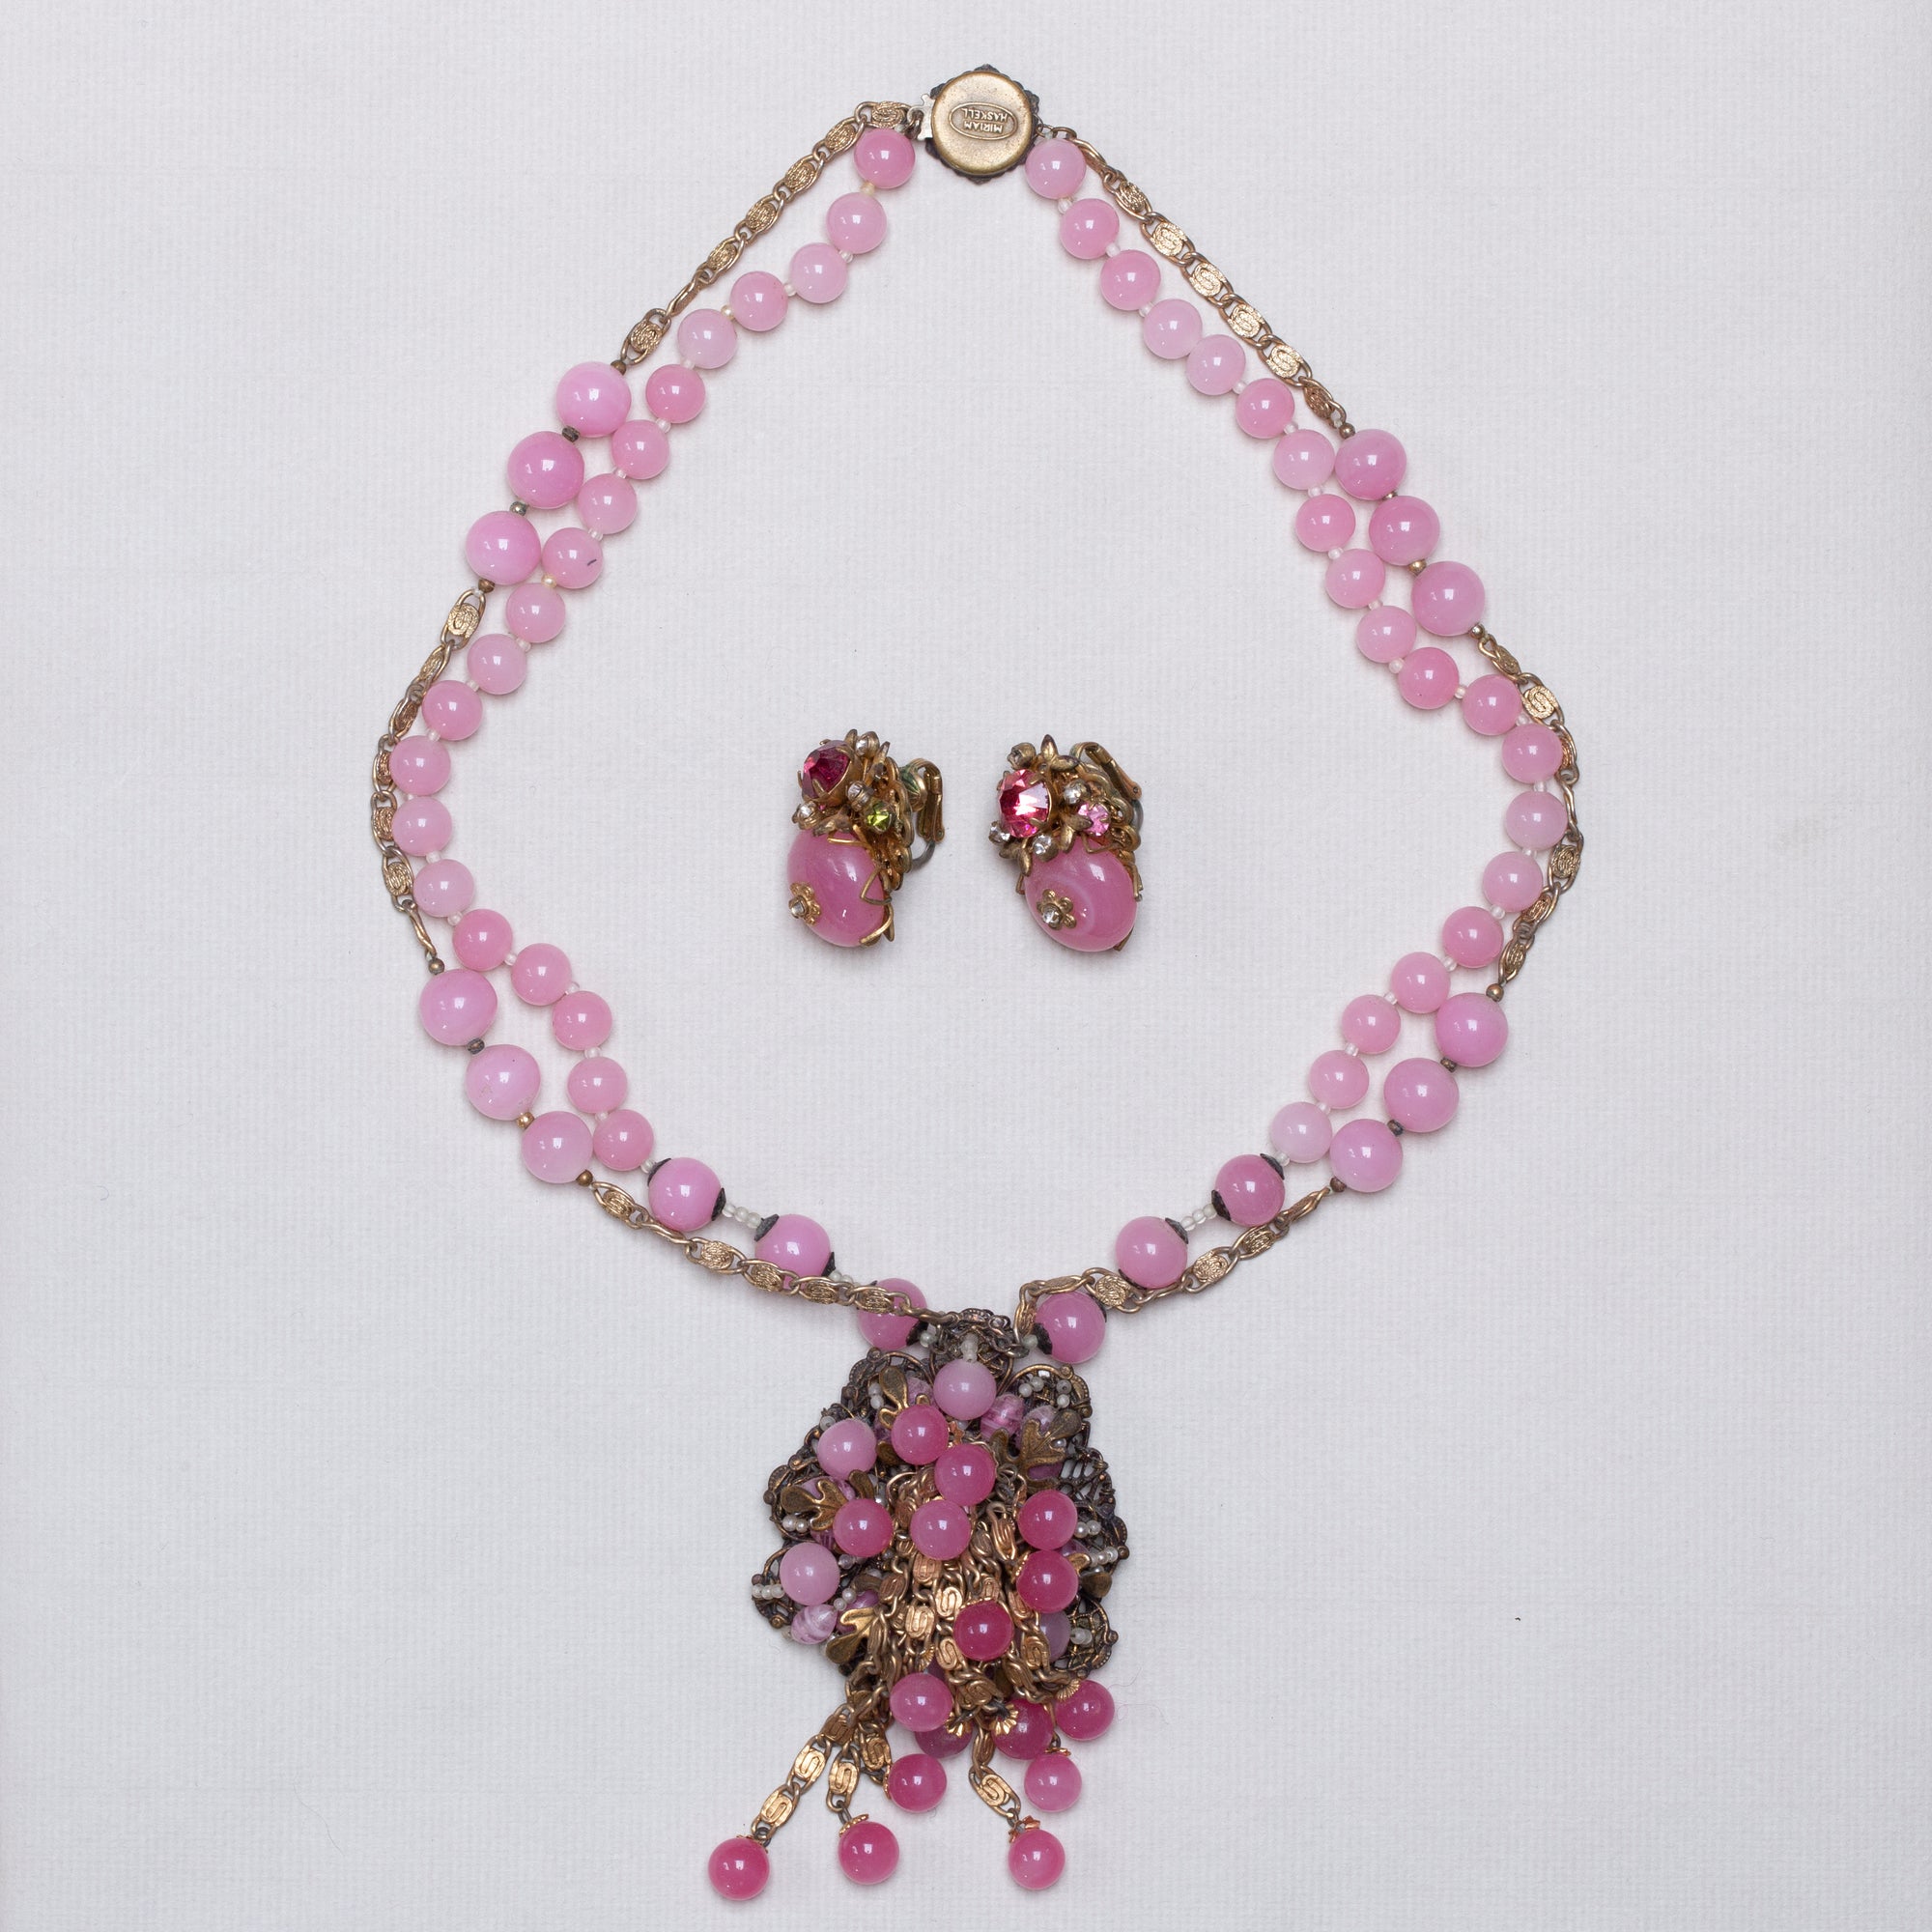 Vintage Pink Necklace and Earrings